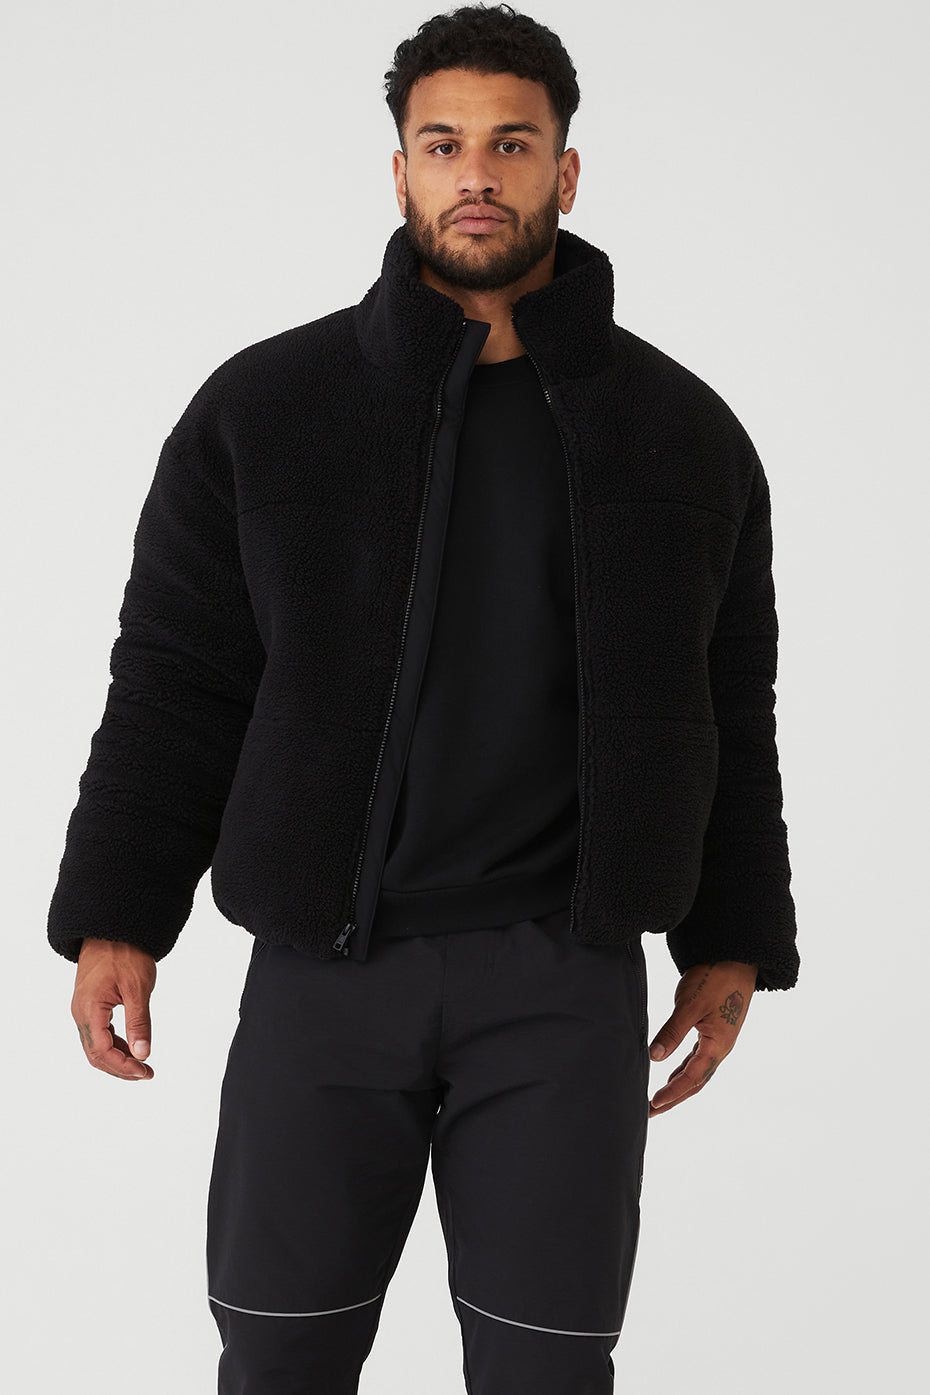 Stay in Style With Men's Performance Outerwear From Alo Yoga